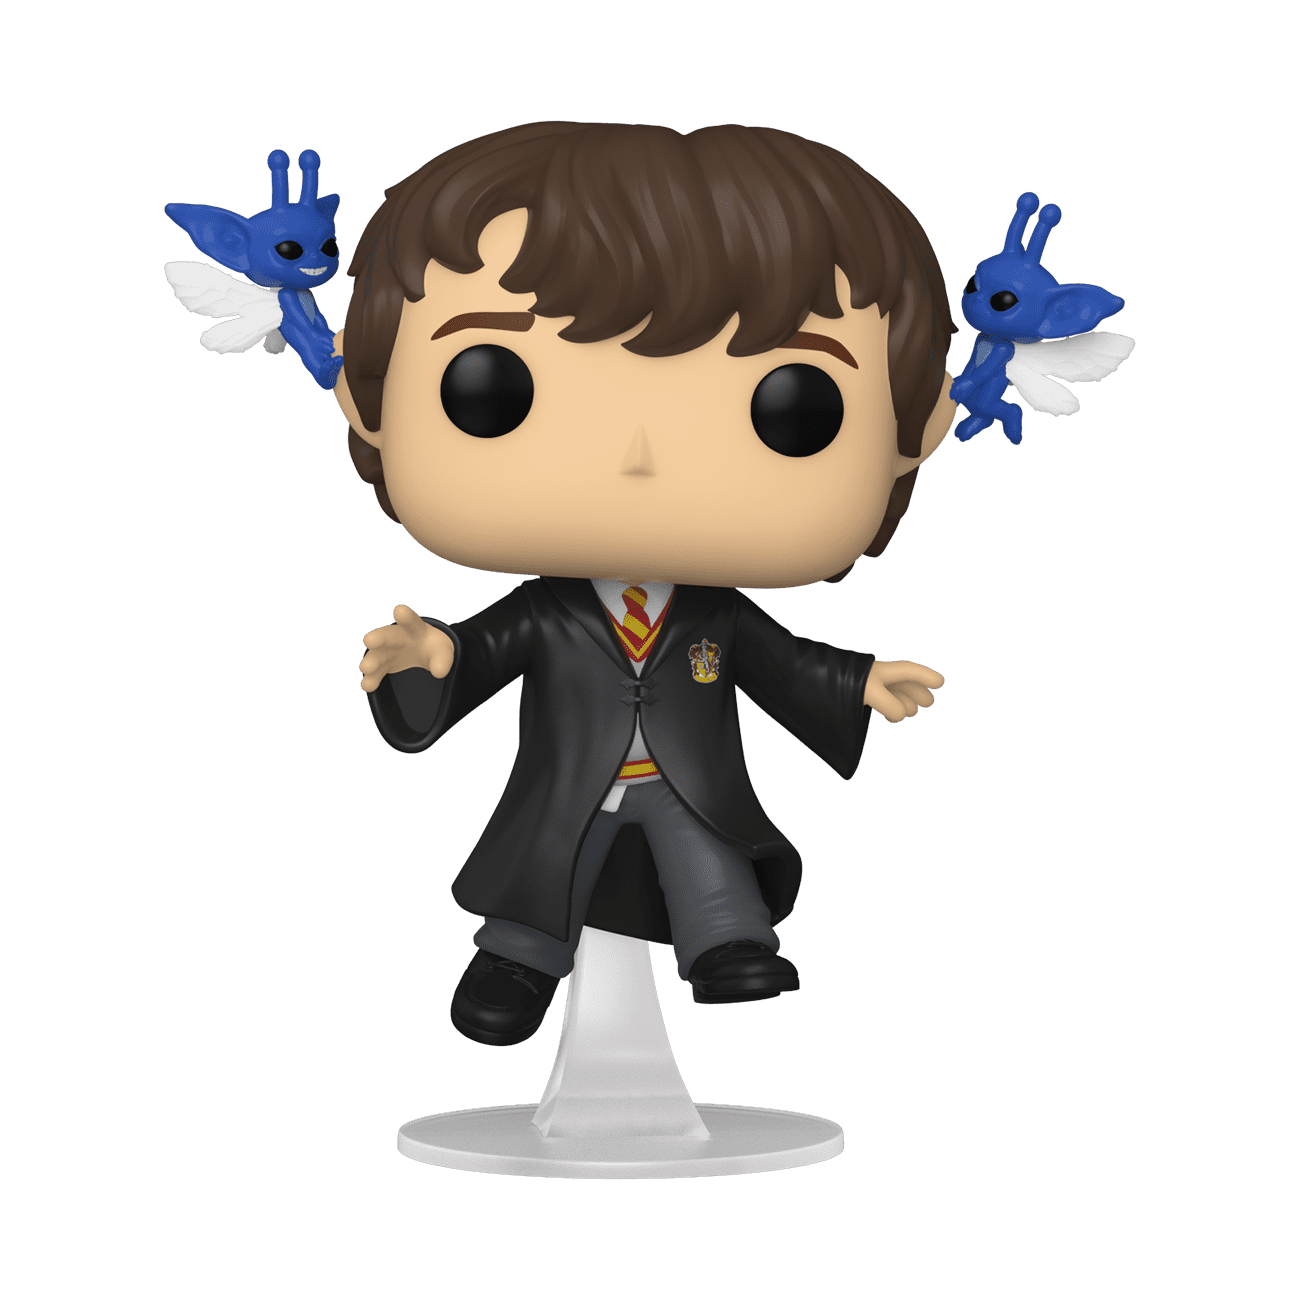 Funko Pop! Movies: Potter - Neville with Pixies Vinyl Figure (Fall 2022 Convention Exclusive) - Walmart.com